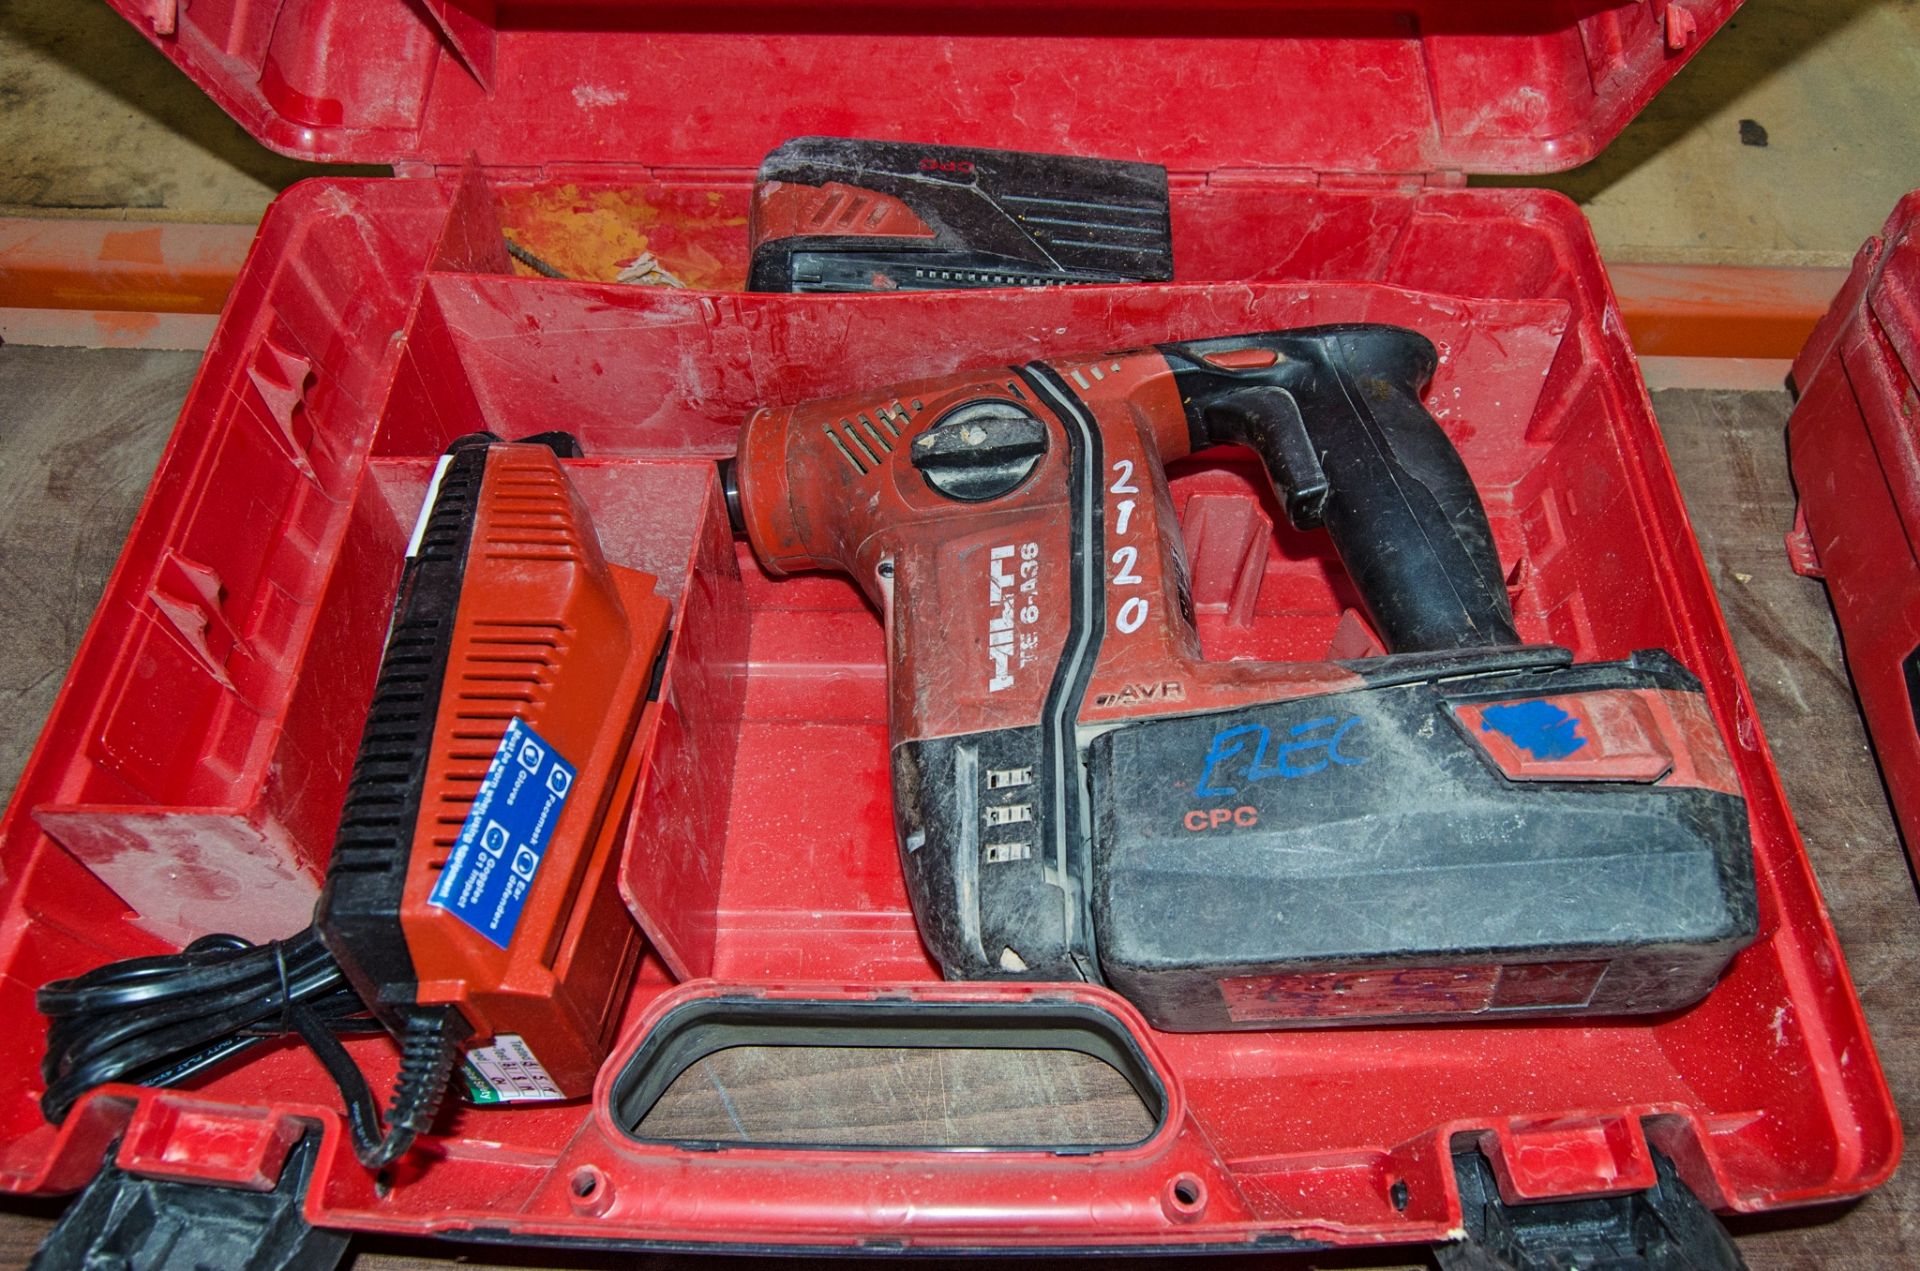 Hilti TE6-A36 36v cordless SDS rotary hammer drill c/w 2 batteries, charger and carry case ** No